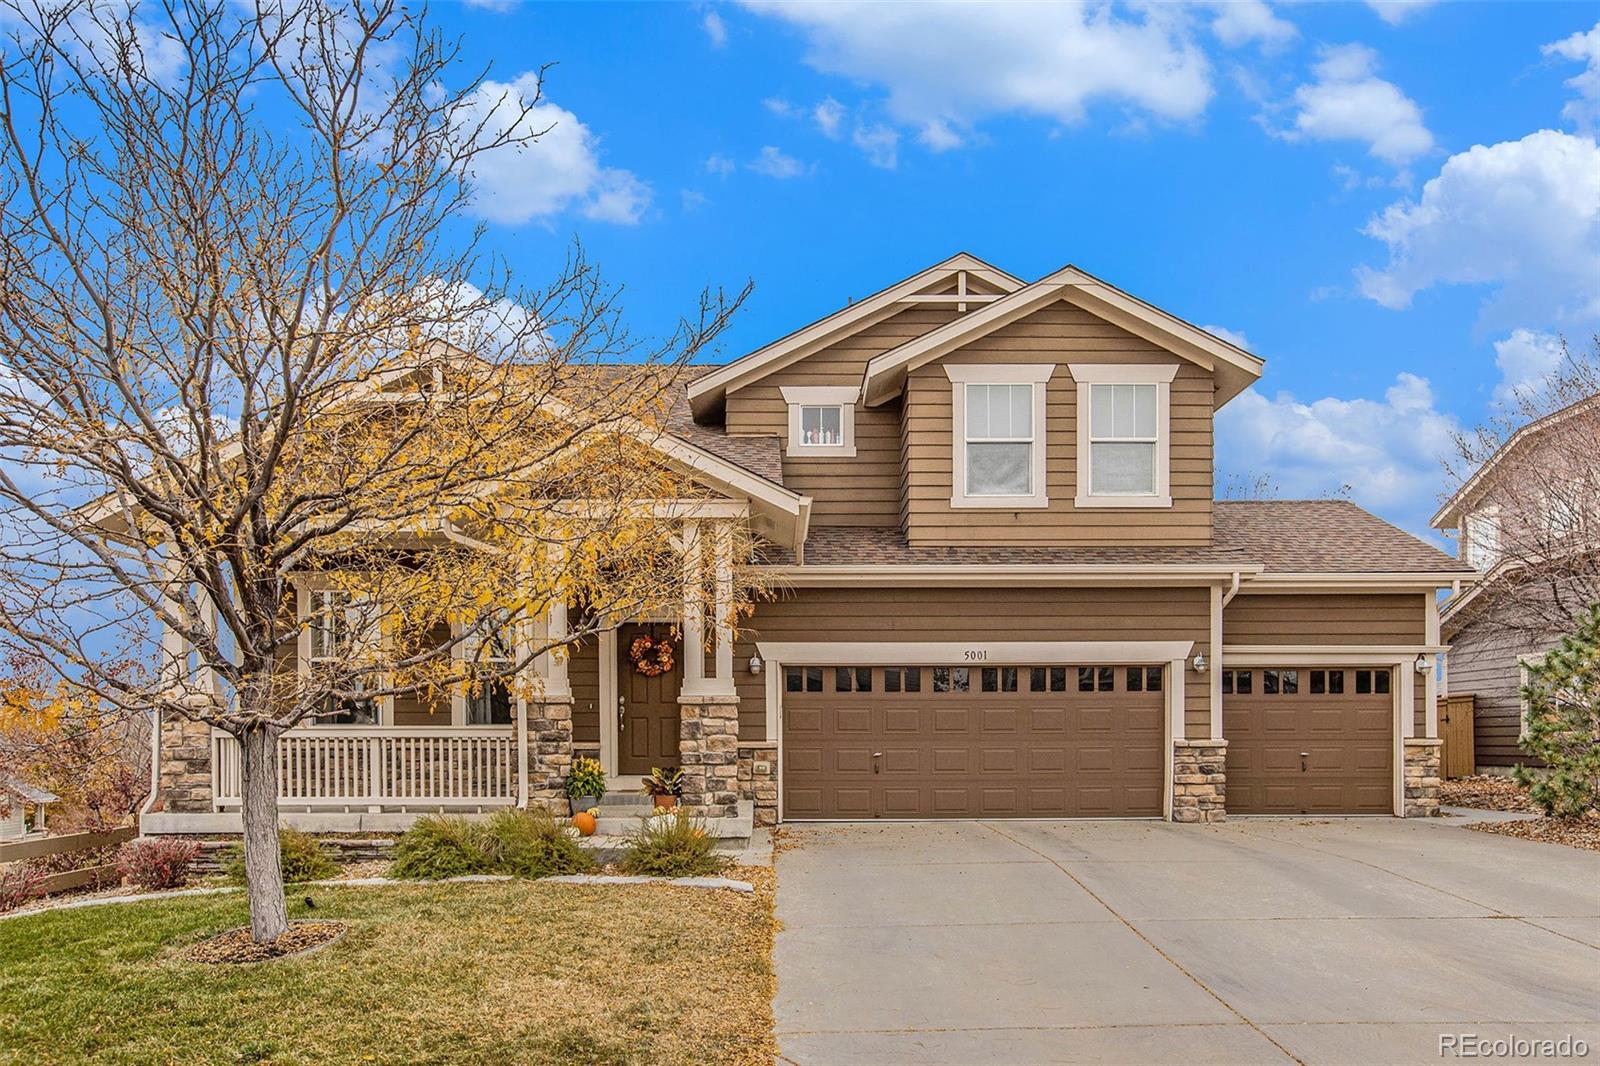 5001  Wagon Box Place, highlands ranch MLS: 6940013 Beds: 6 Baths: 4 Price: $975,000